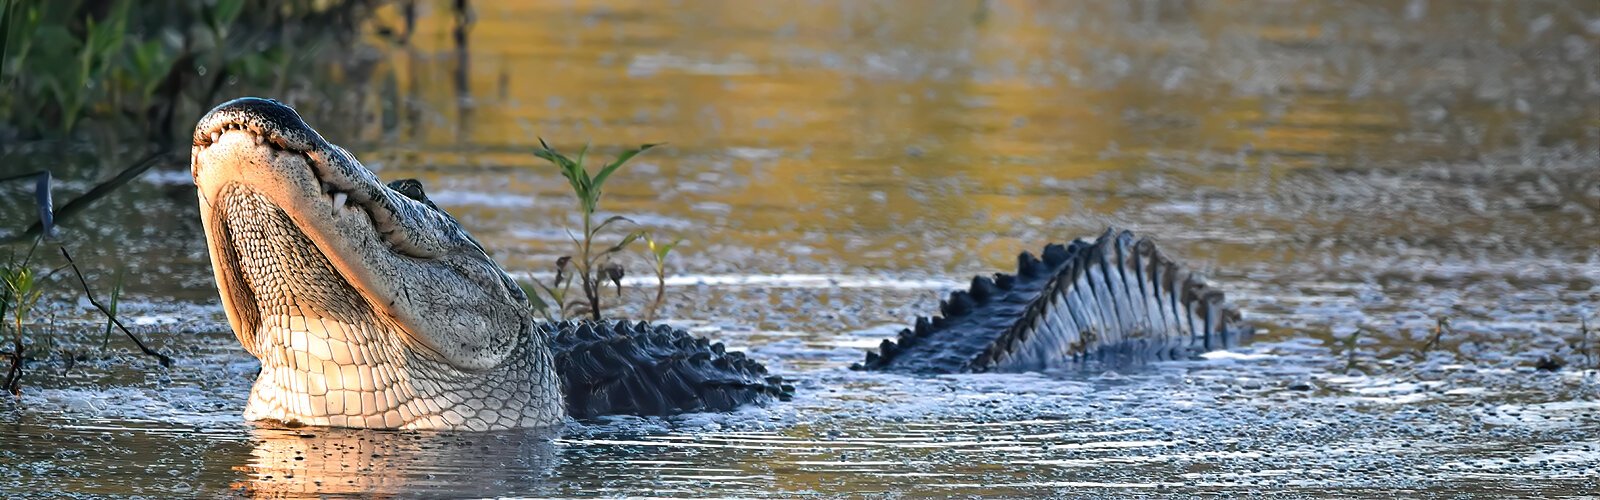 During the breeding season, the loud bellowing of alligators in heat resonates through Alligator Alley and Marsh Rabbit Run, giving the reserve a spooky atmosphere.